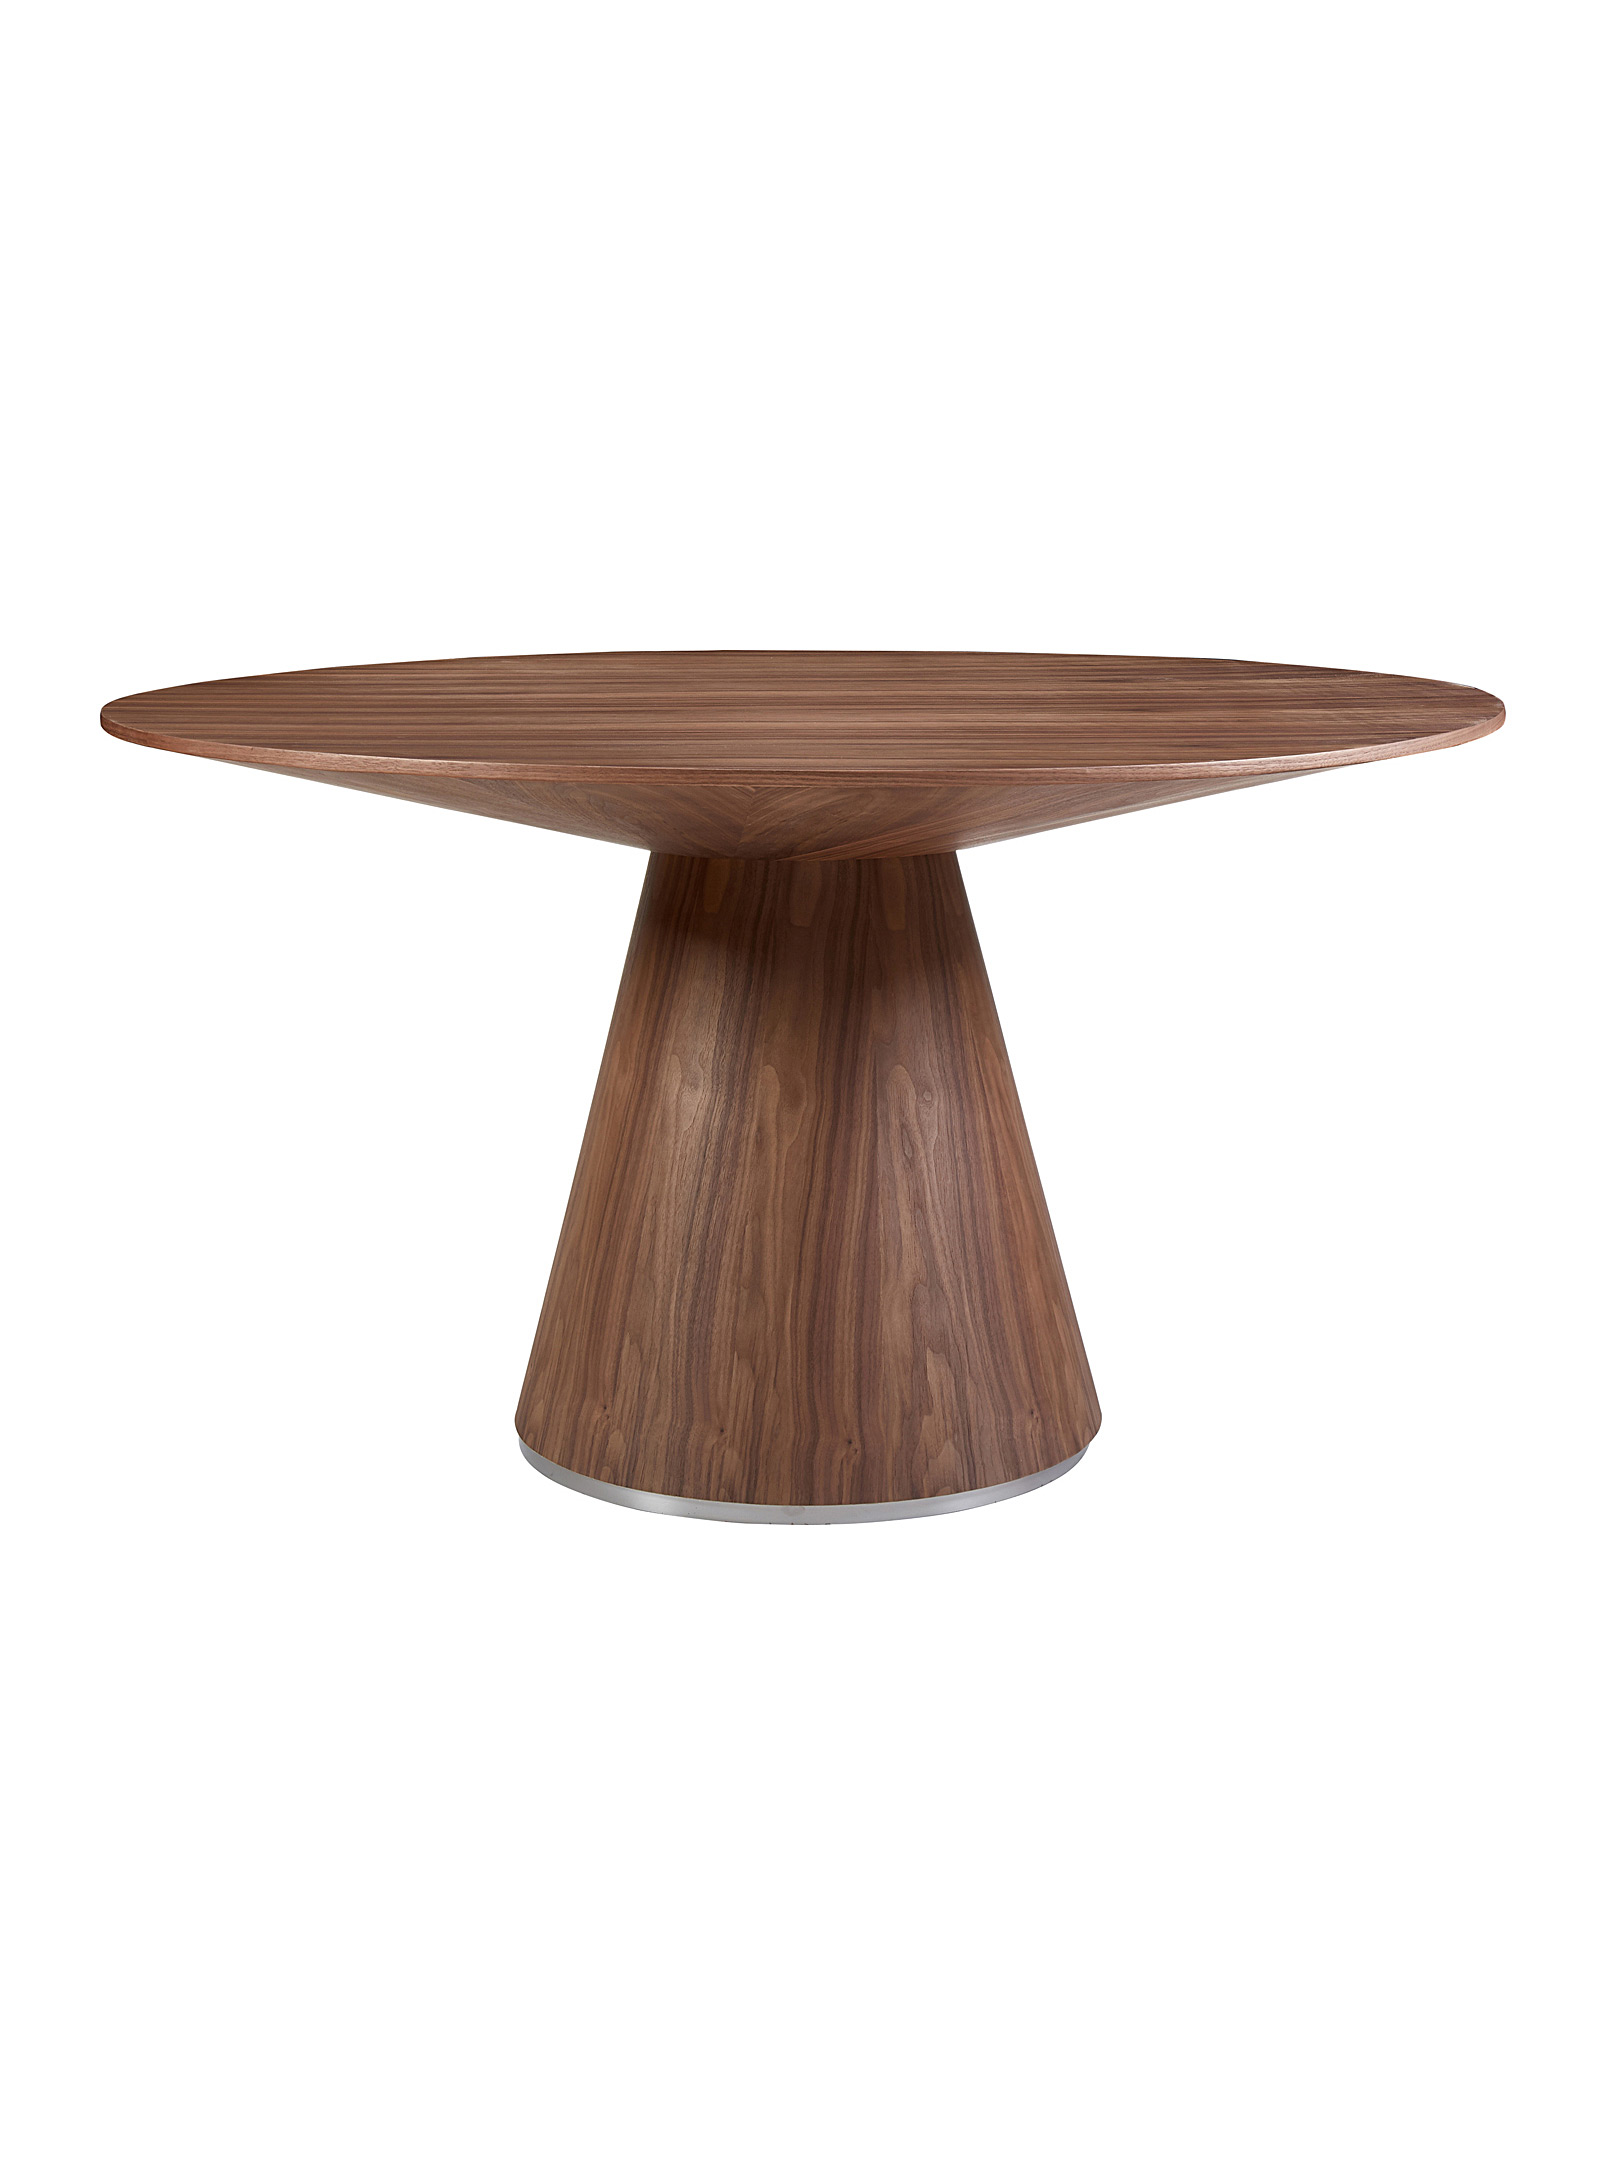 Moe's Home Collection - Otago walnut wood round dining table